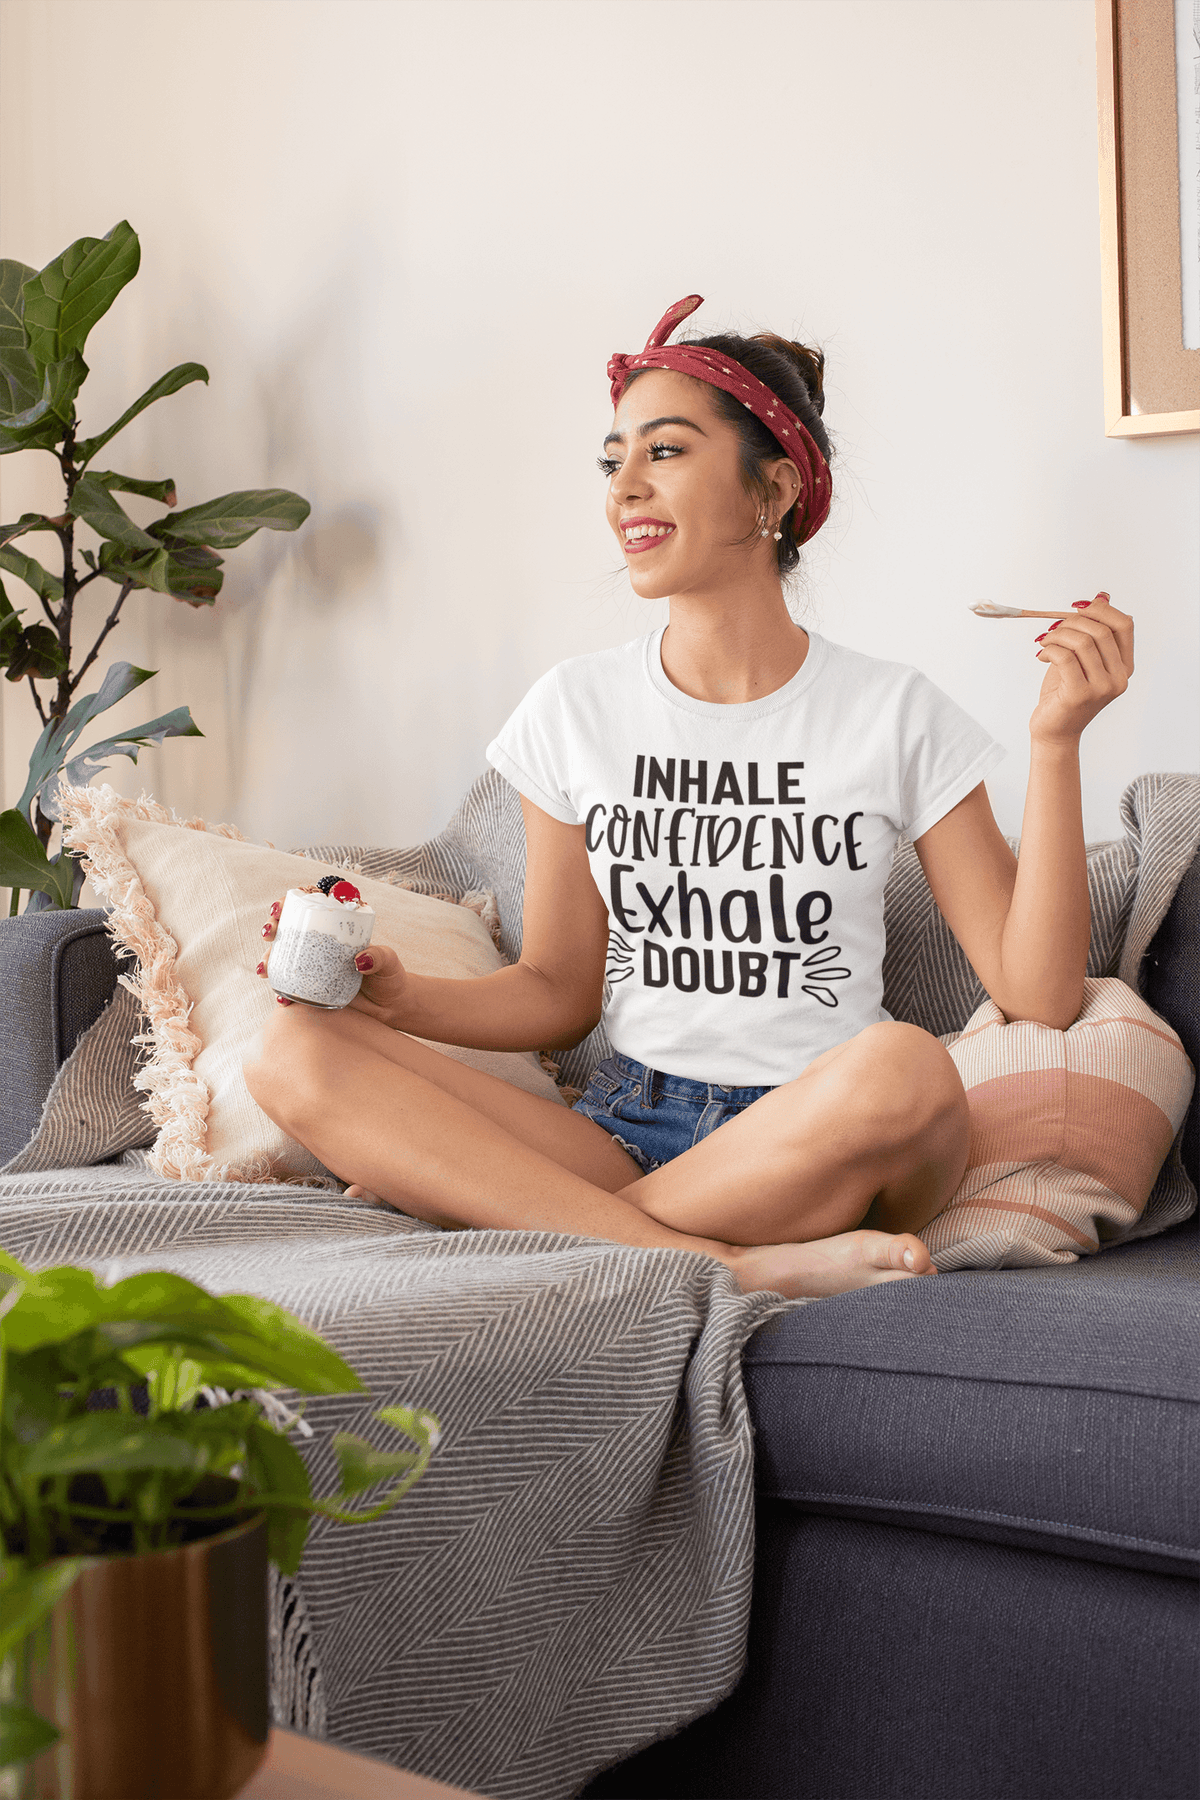 Inhale Confidence Exhale Doubt T-shirt-Regular Fit Tee-StylinArts